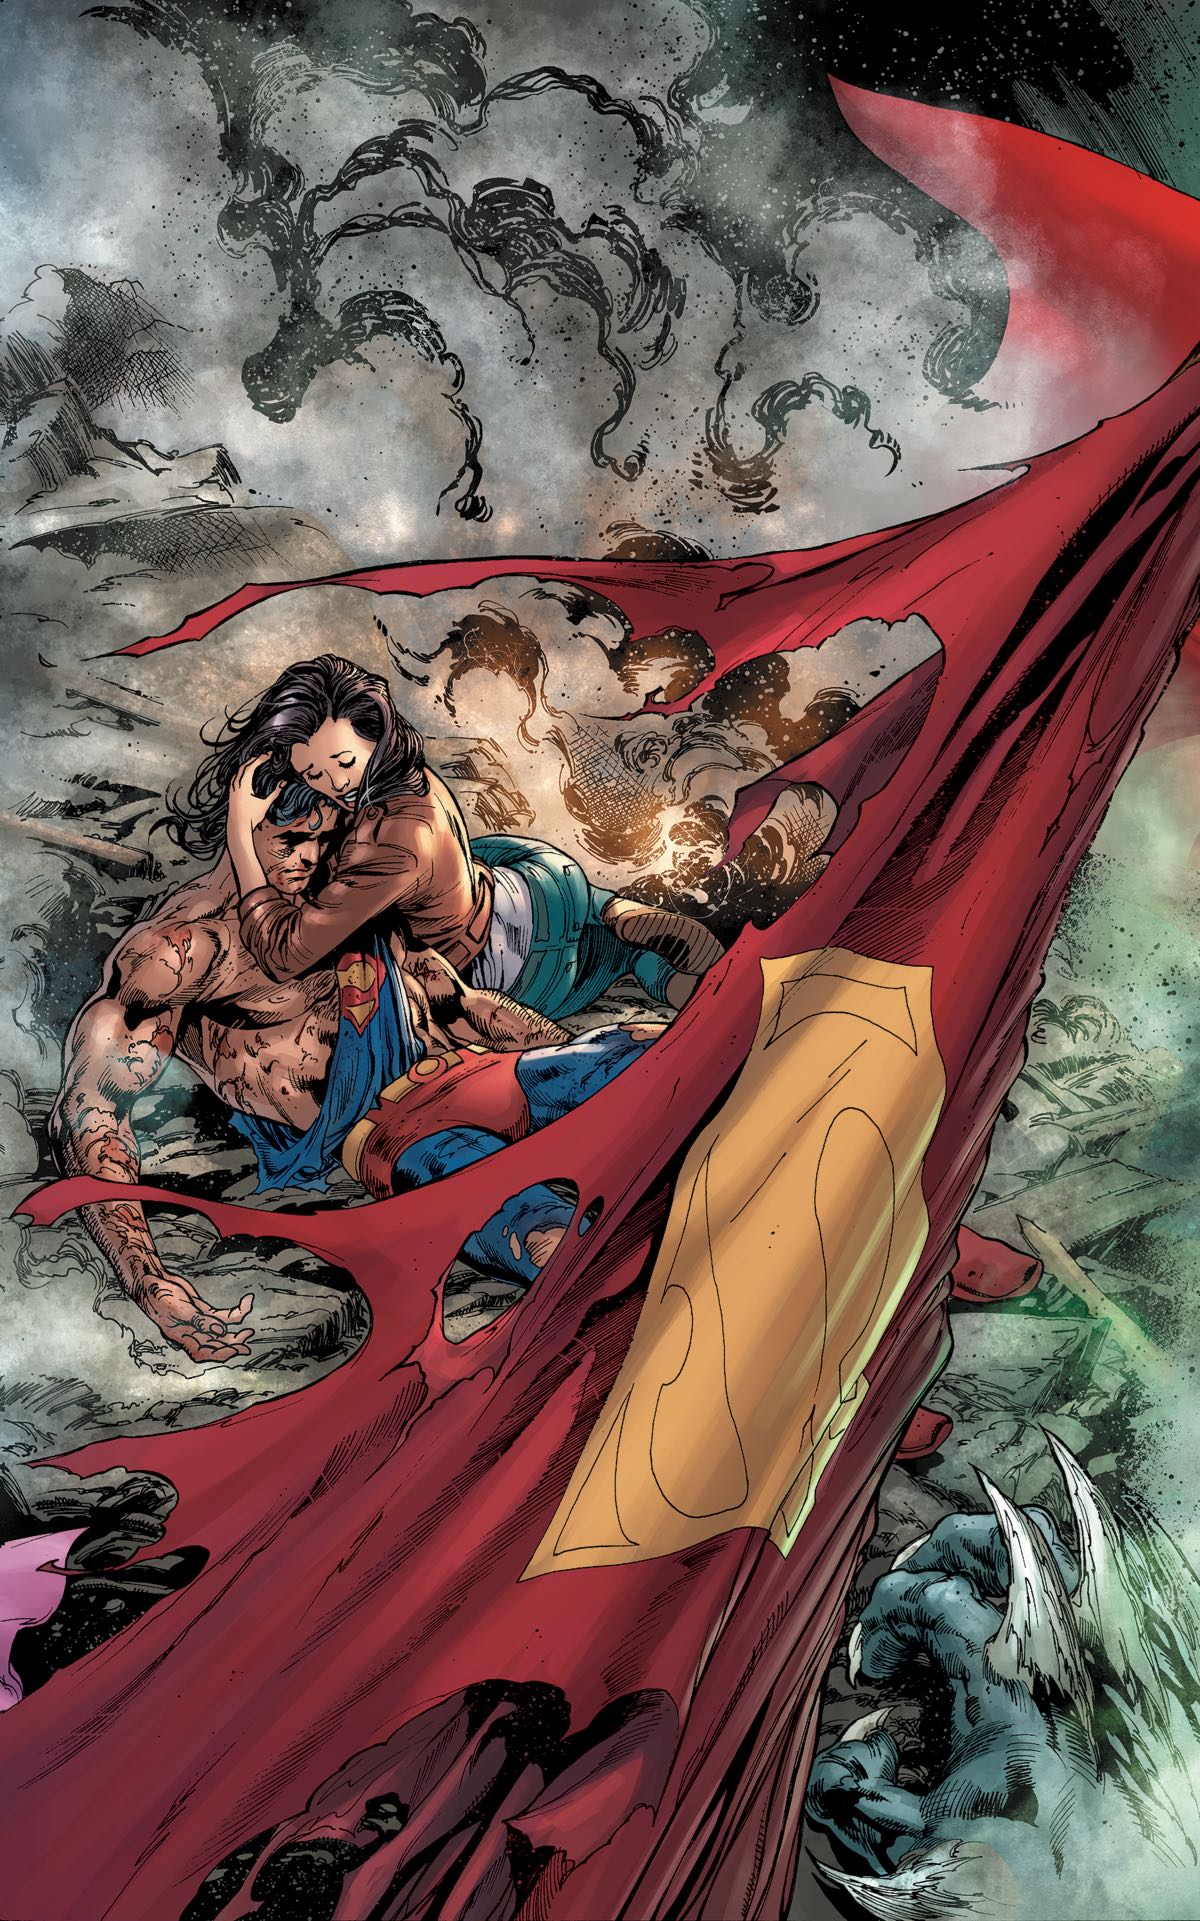 THE MAN OF STEEL #5